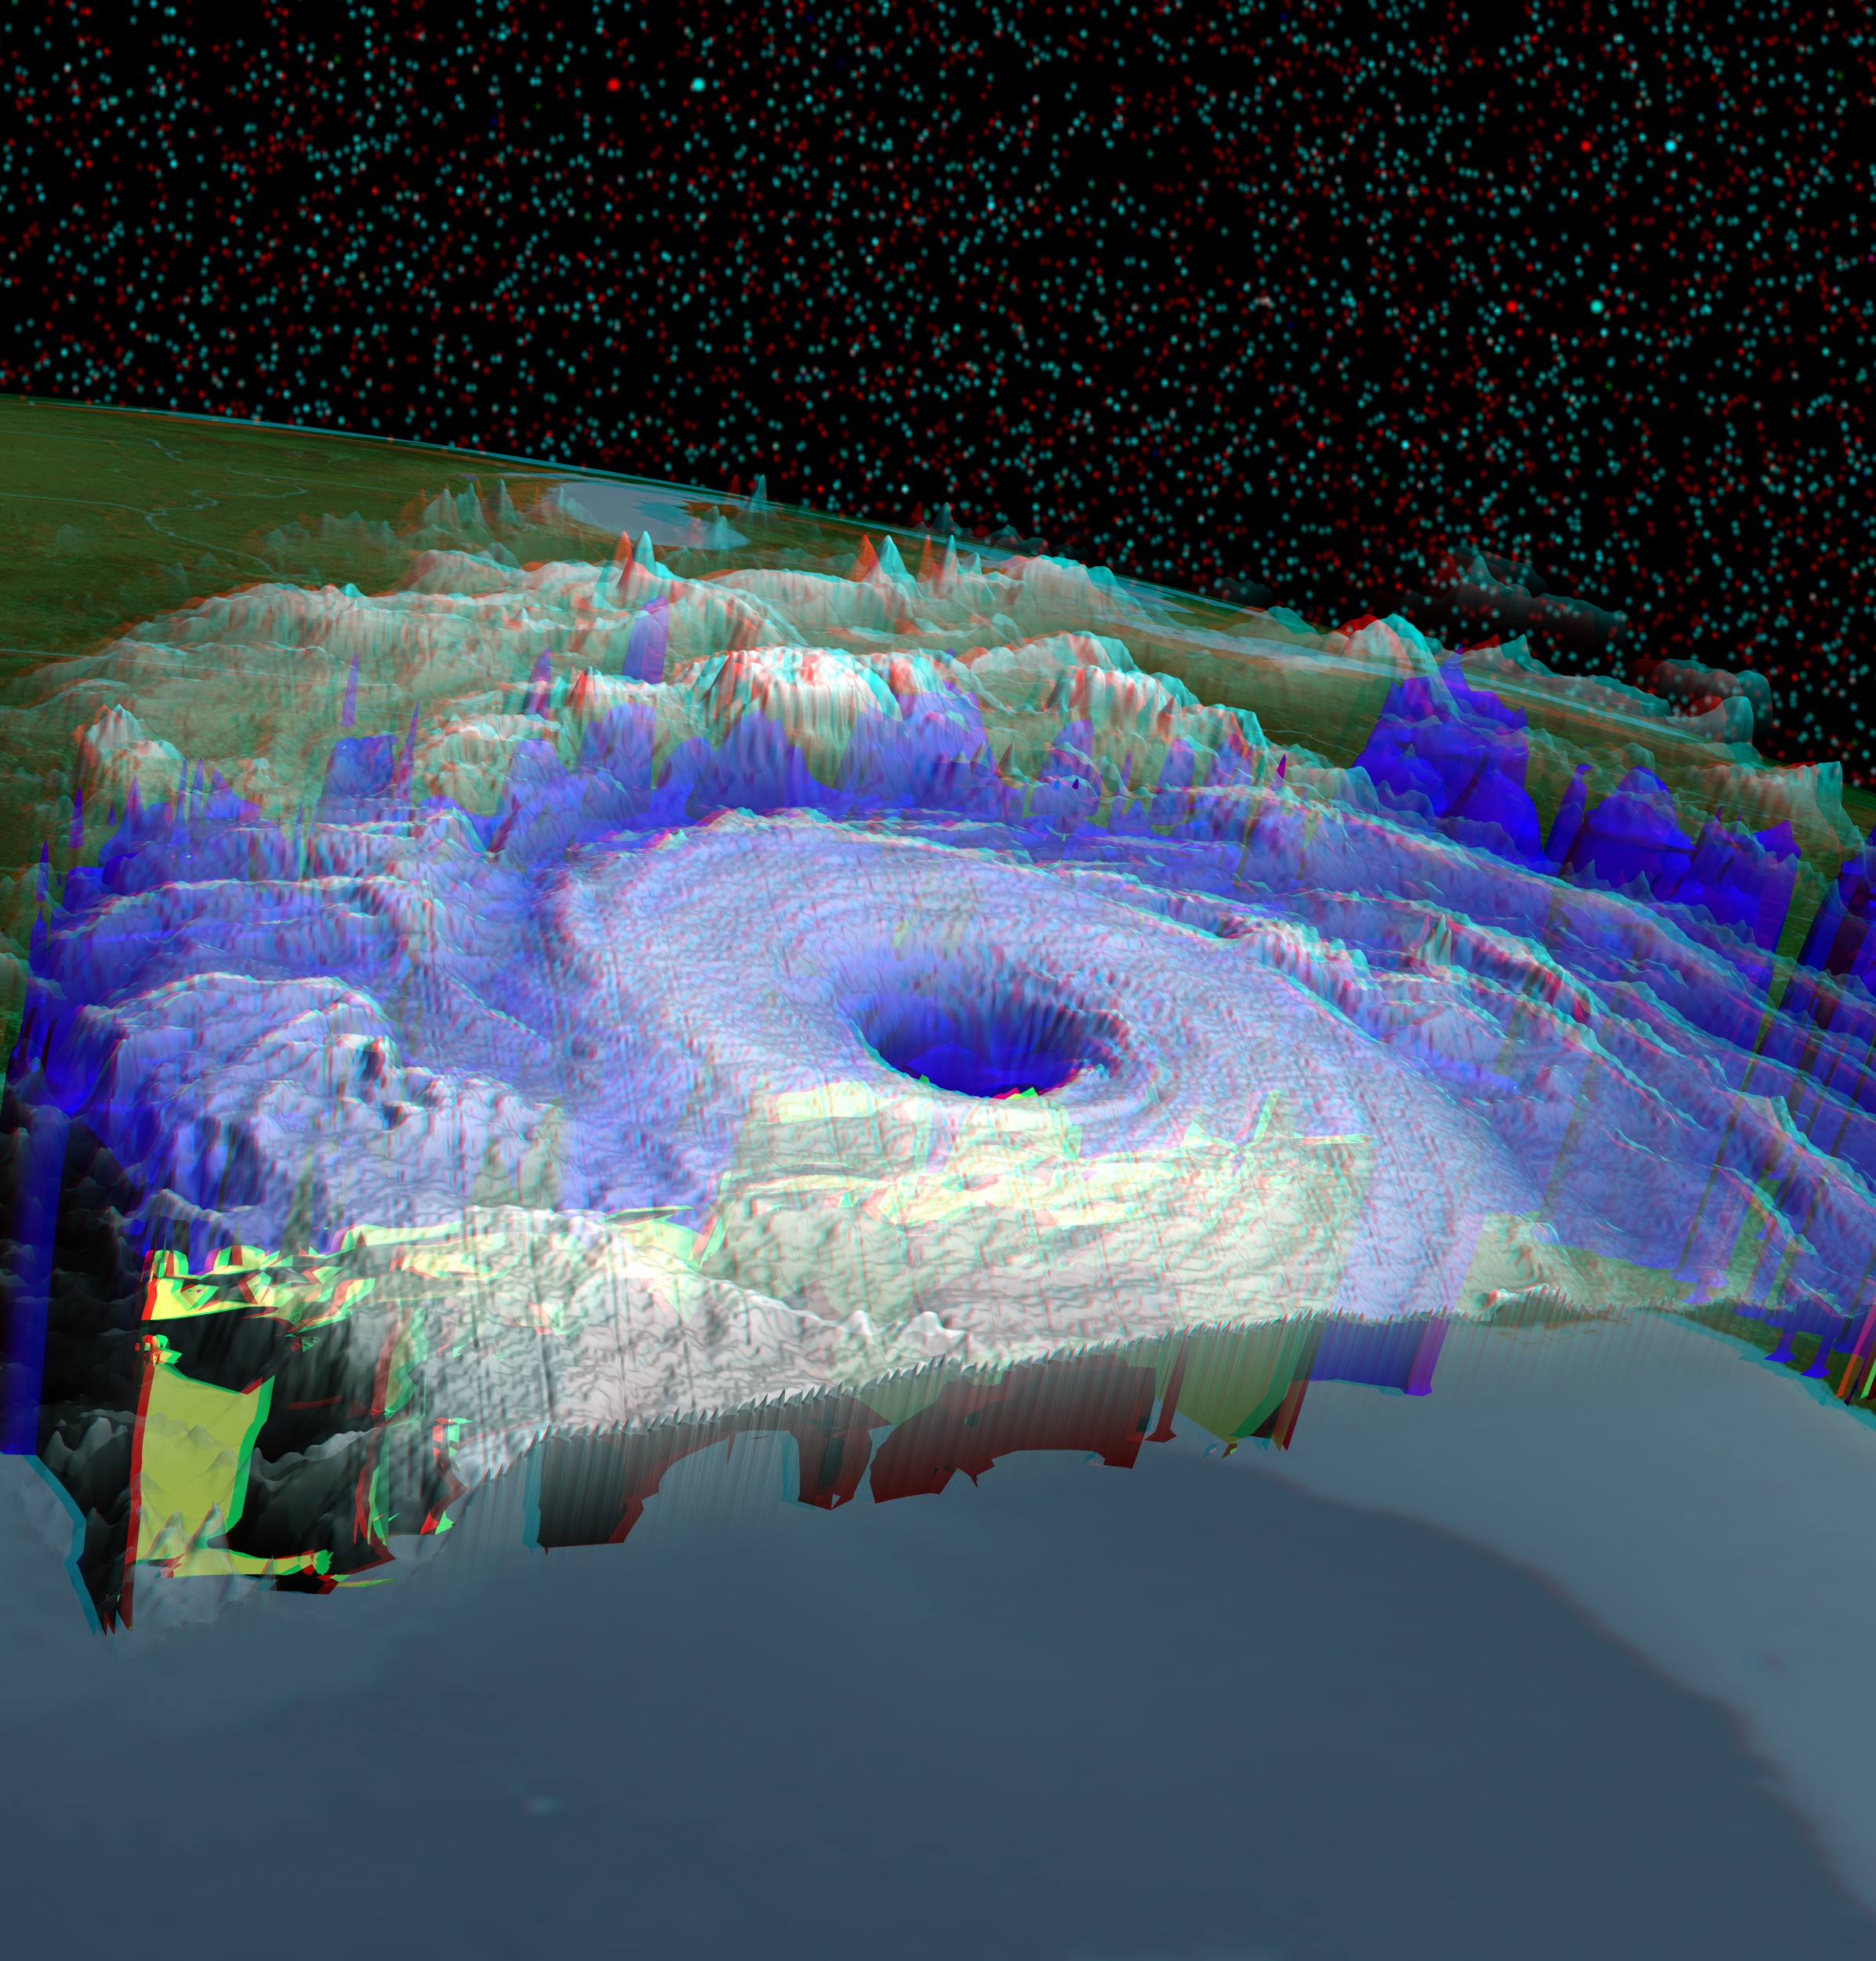 3D stereographic anaglyph of Hurricane Katrina using TRMM and GOES data.  (Red/Cyan glasses are required to view this image properly.) 